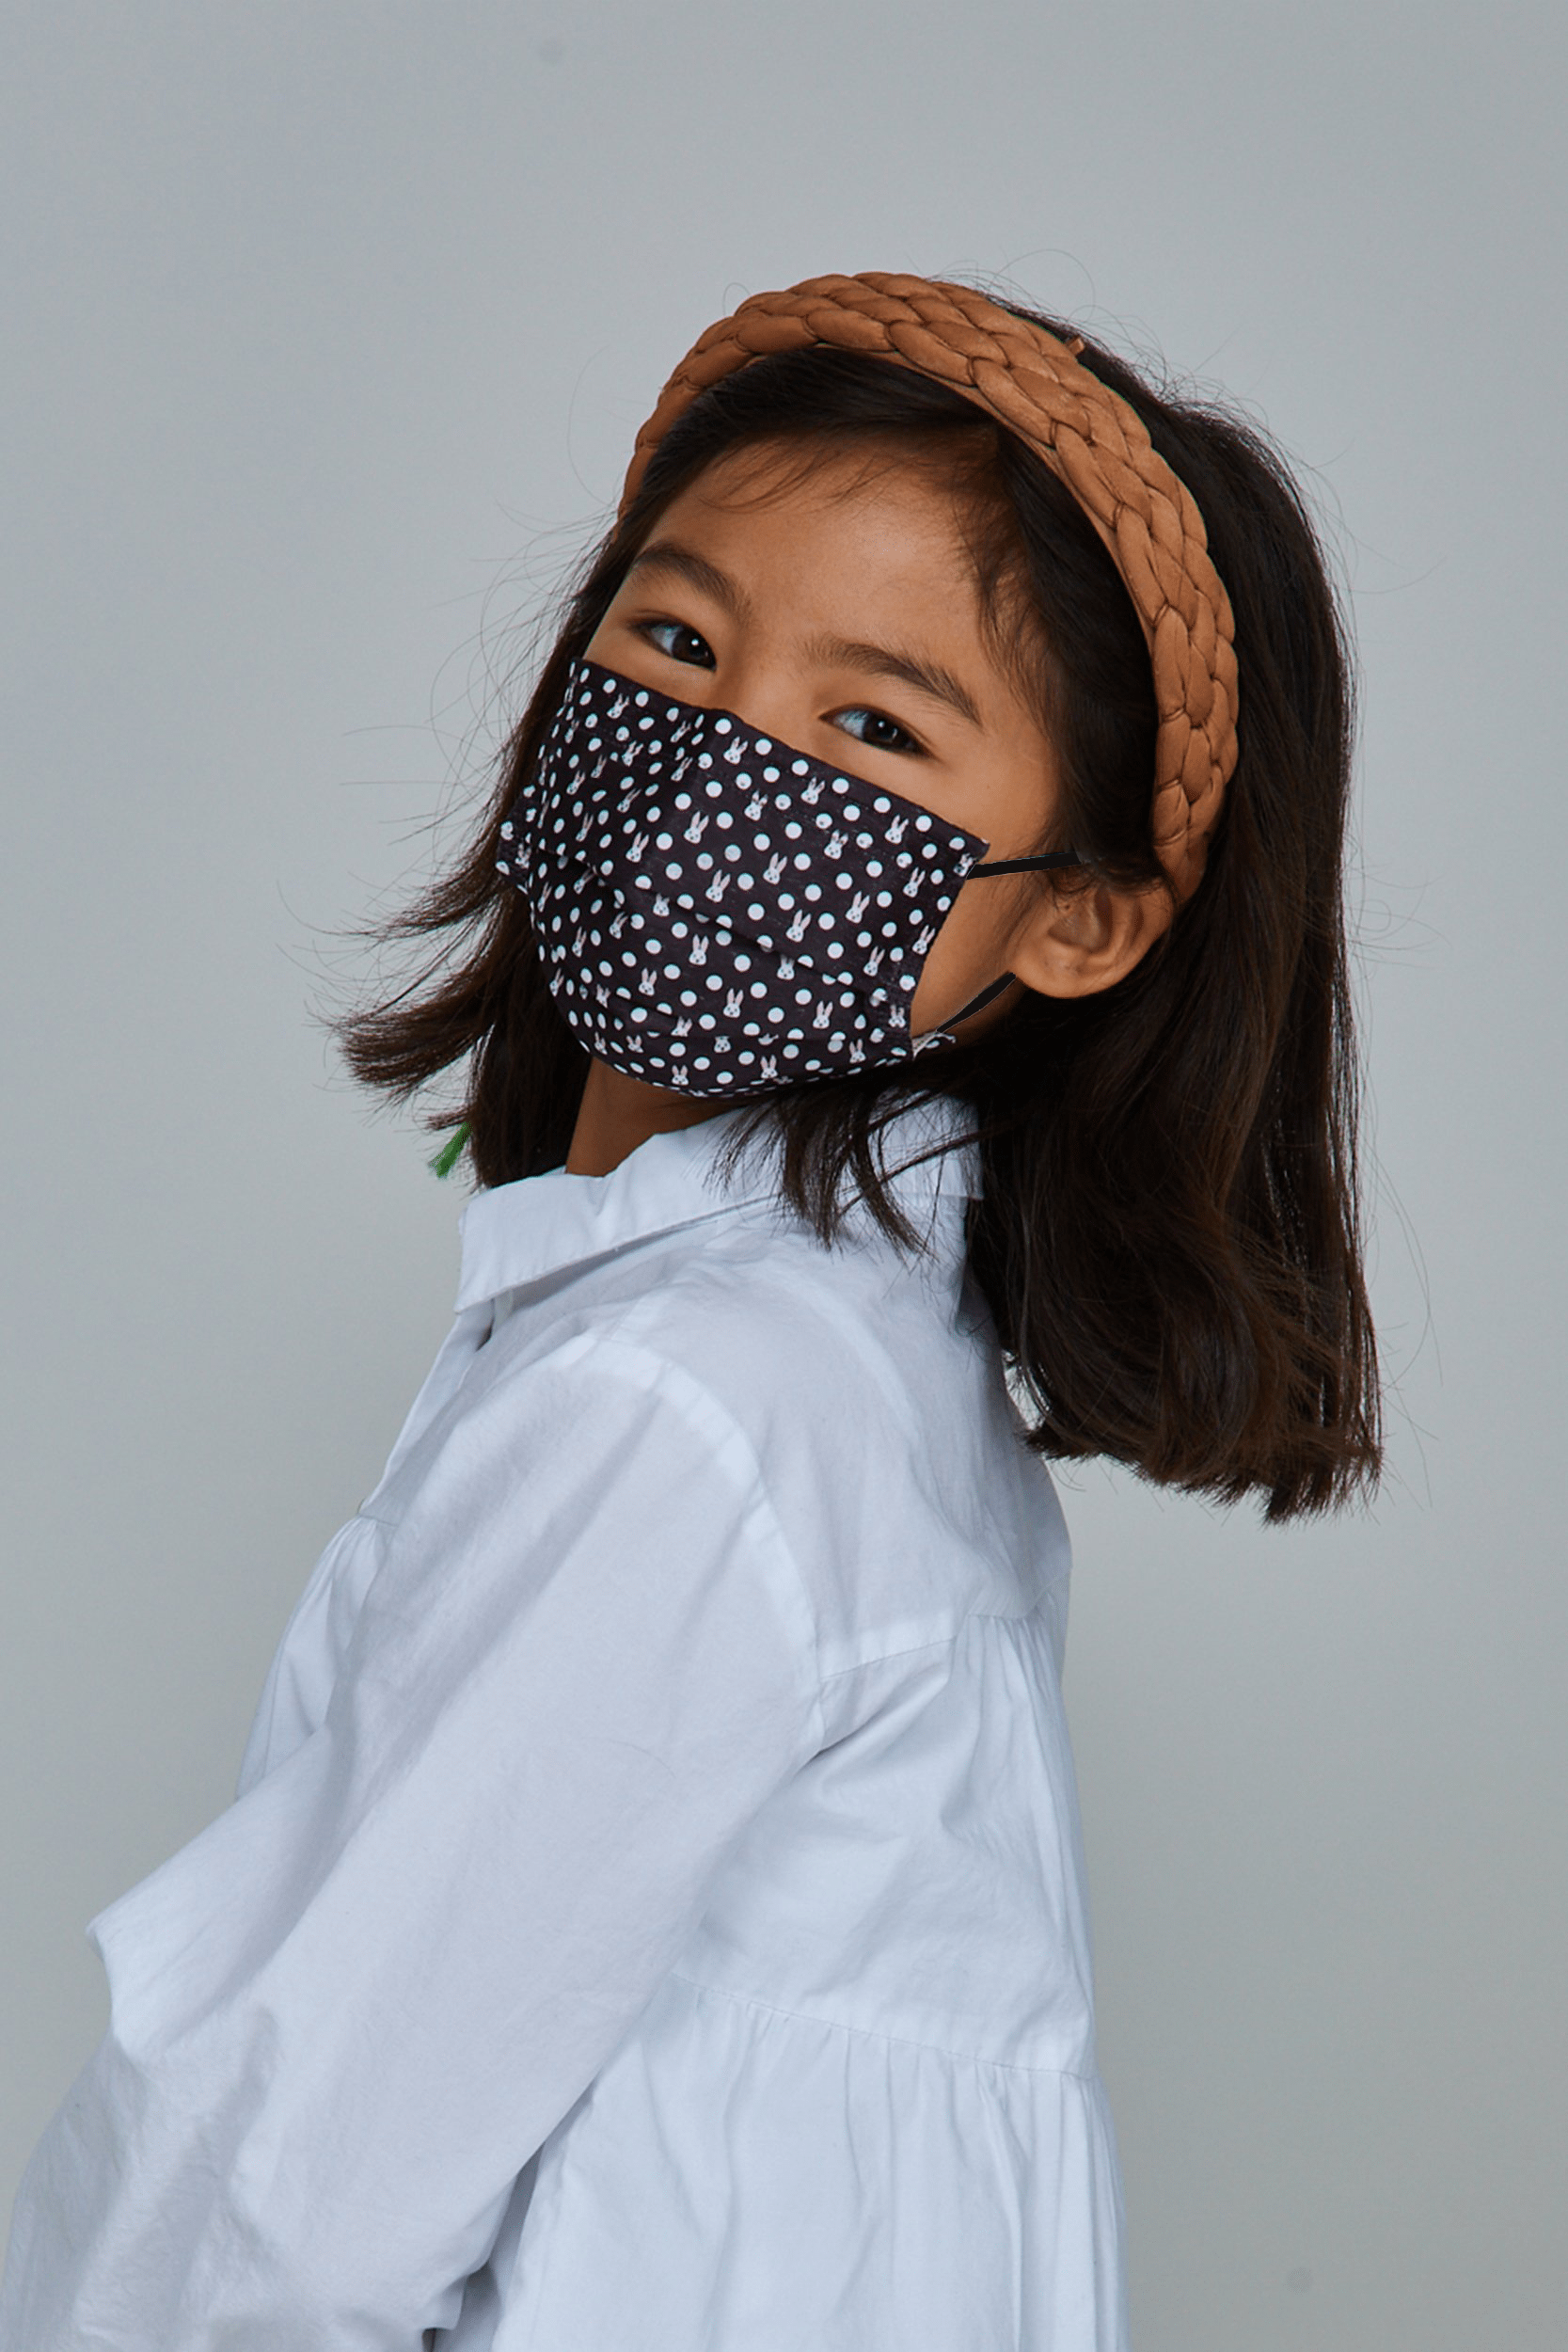 Child wearing stylish Polka Dot Bunny Pleated face mask, with three layers & high quality breathable fabric. 